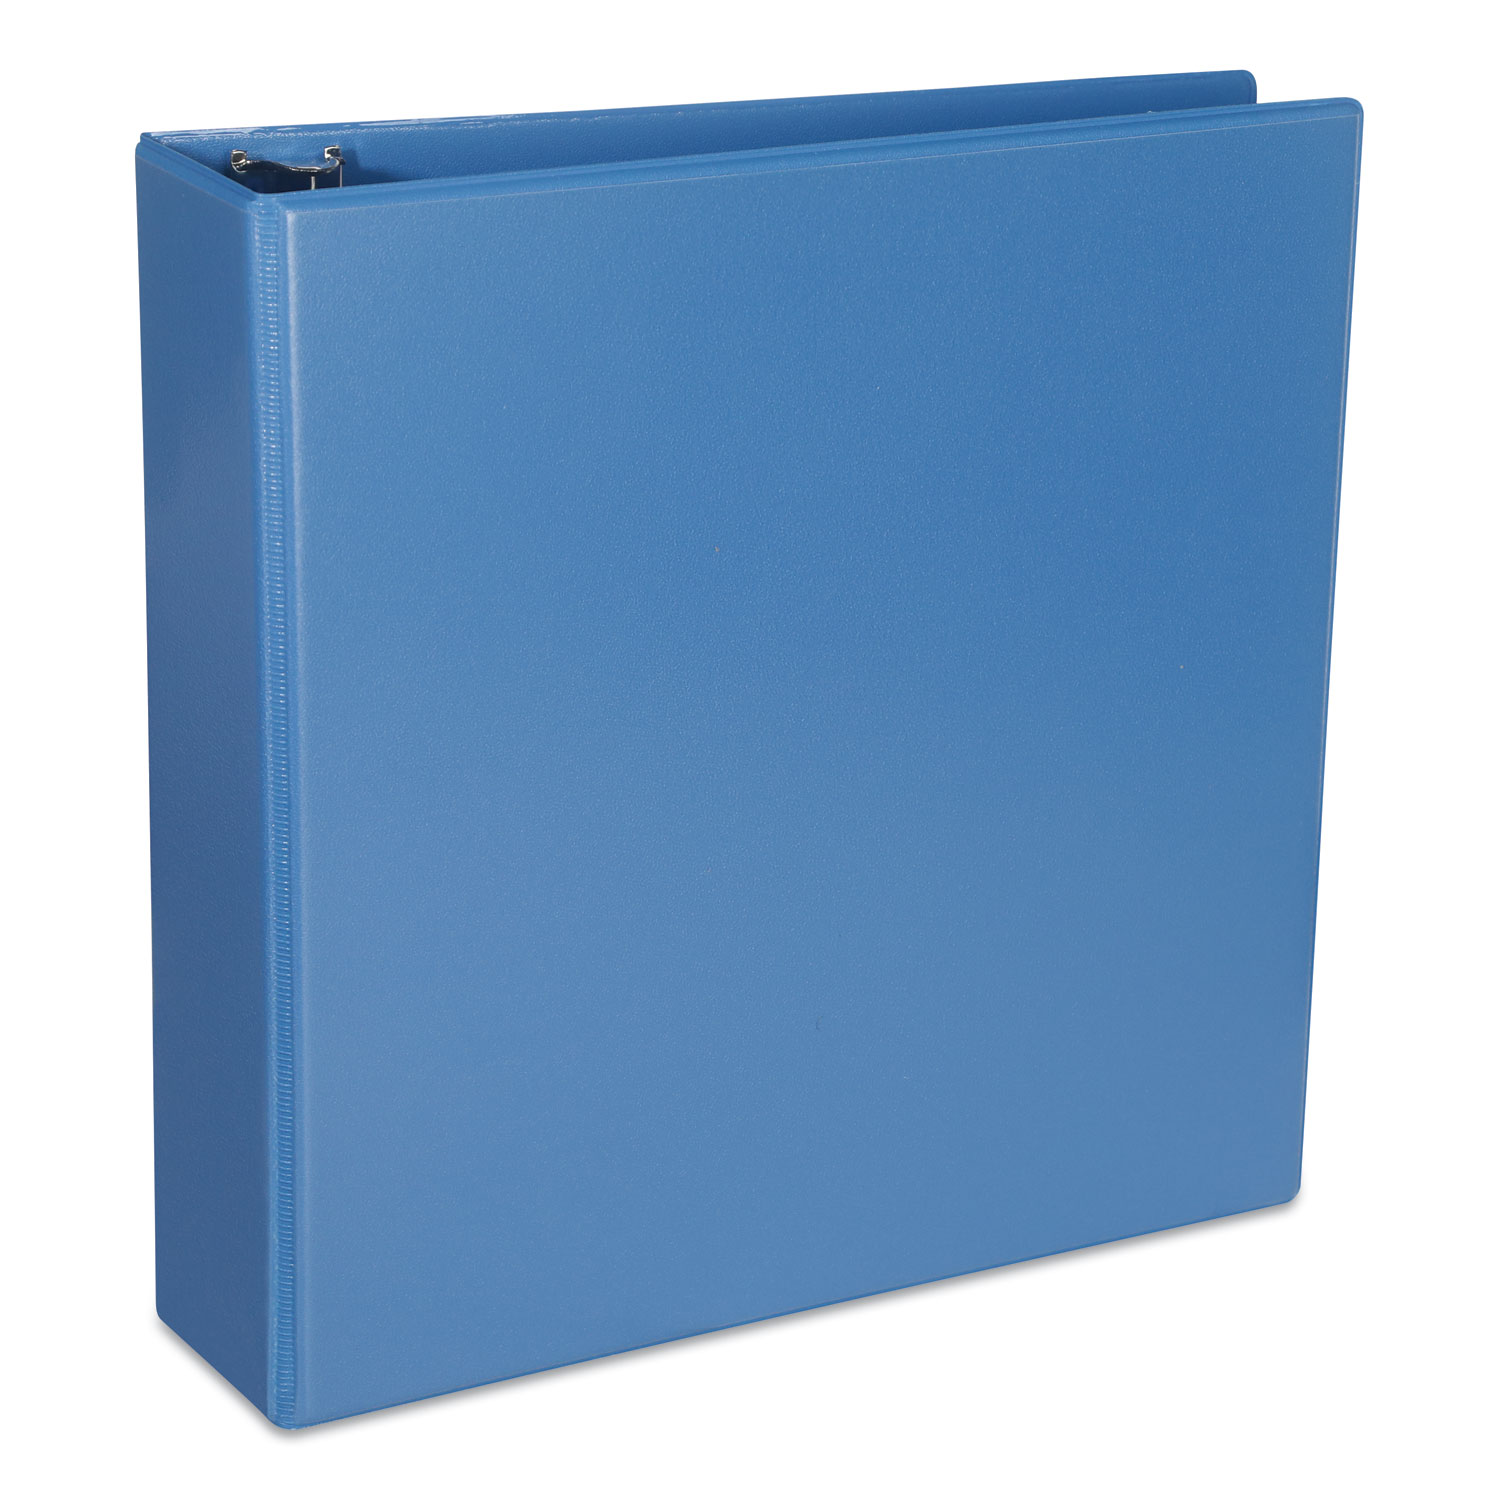  Universal UNV20733 Deluxe Round Ring View Binder, 3 Rings, 2 Capacity, 11 x 8.5, Light Blue (UNV20733) 